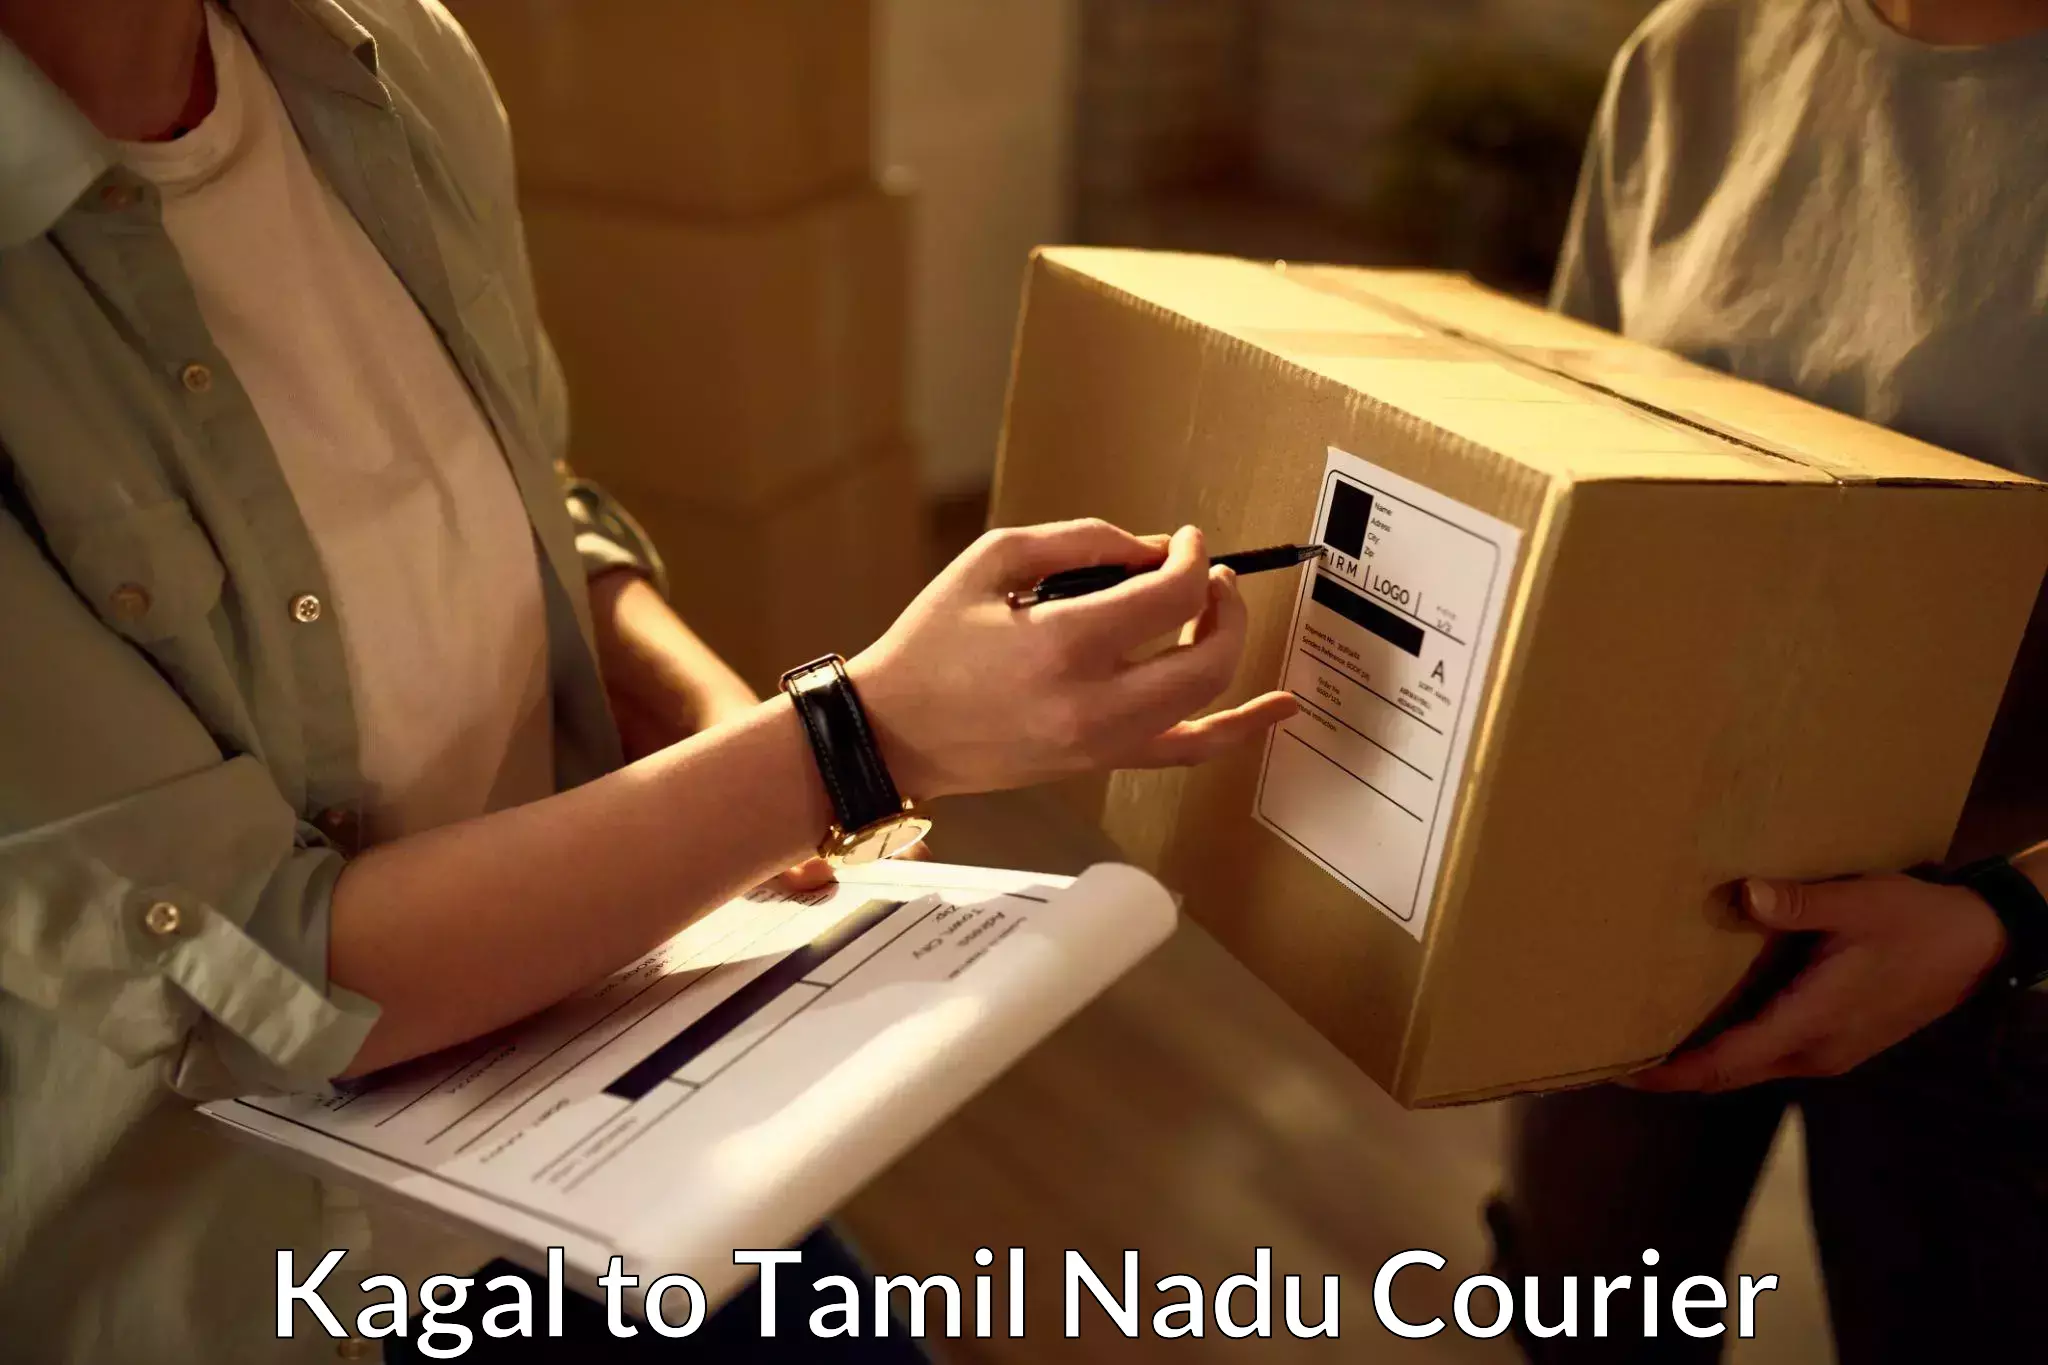 Fast delivery service Kagal to Rathinasabapathy Puram